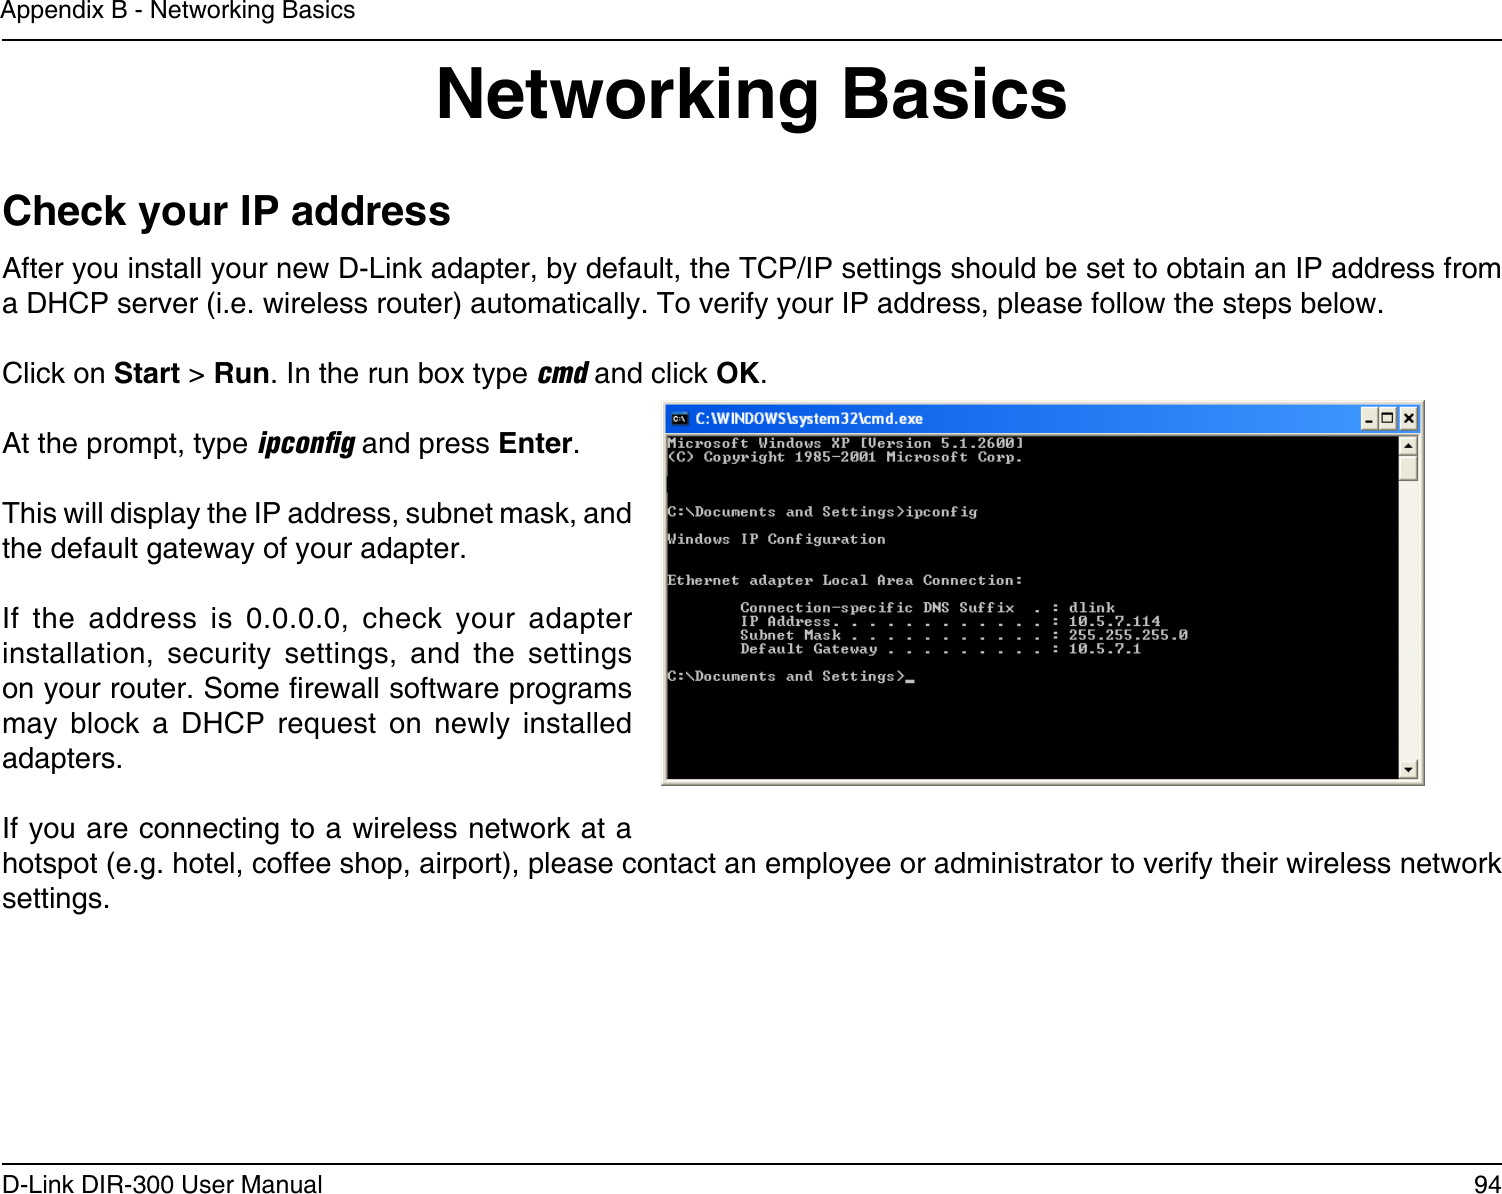 94D-Link DIR-300 User ManualAppendix B - Networking BasicsNetworking BasicsCheck your IP addressAfter you install your new D-Link adapter, by default, the TCP/IP settings should be set to obtain an IP address from a DHCP server (i.e. wireless router) automatically. To verify your IP address, please follow the steps below.Click on Start &gt; Run. In the run box type cmd and click OK.At the prompt, type ipconﬁg and press Enter.This will display the IP address, subnet mask, and the default gateway of your adapter.If  the  address  is  0.0.0.0,  check  your  adapter installation,  security  settings,  and  the  settings on your router. Some rewall software programs may  block  a  DHCP  request  on  newly  installed adapters. If you are connecting to a wireless network at a hotspot (e.g. hotel, coffee shop, airport), please contact an employee or administrator to verify their wireless network settings.